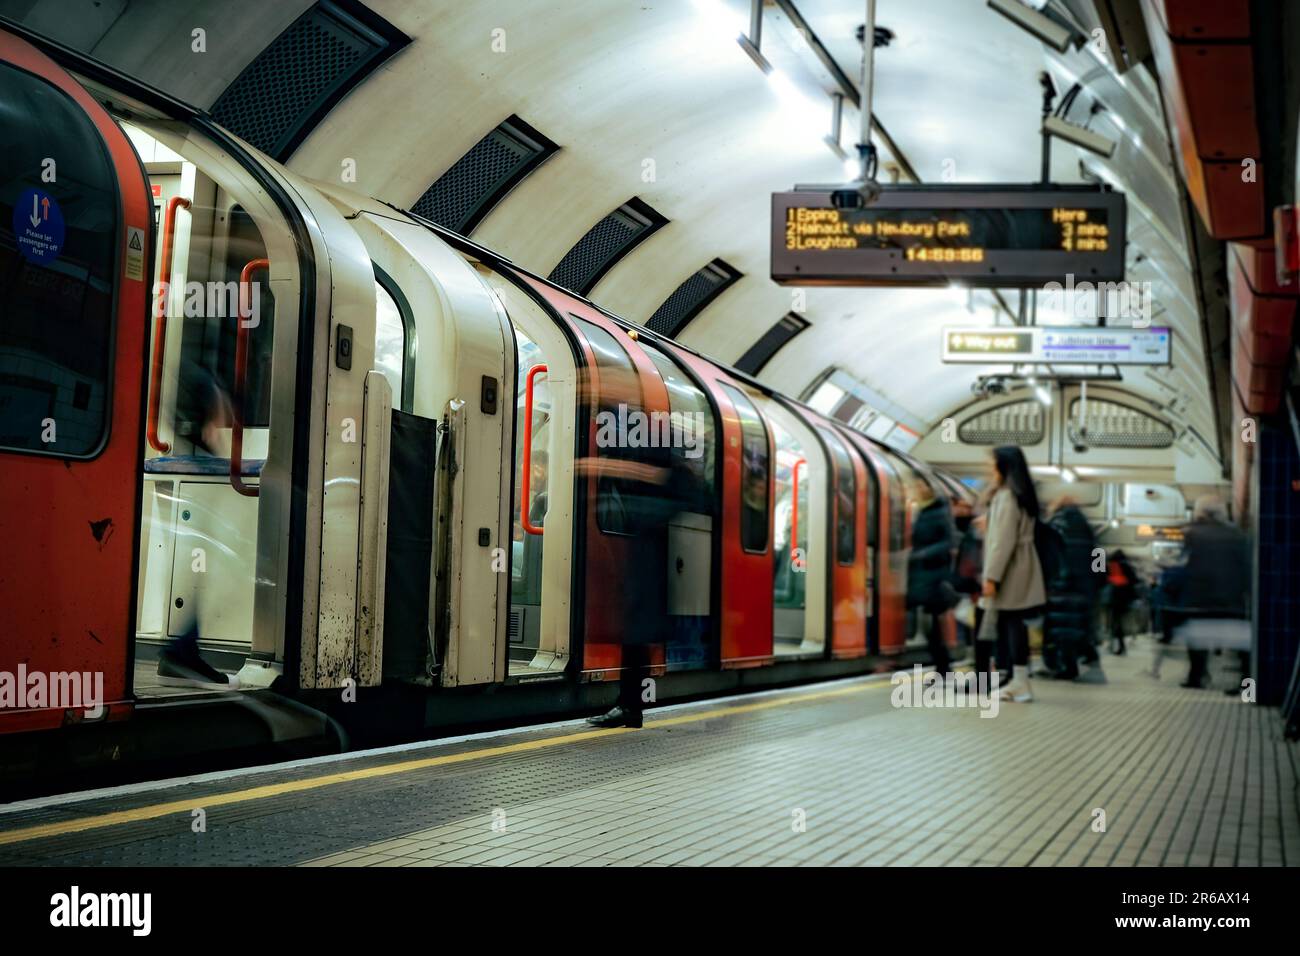 London train platform- motion blurred view with anonymous people Stock Photo